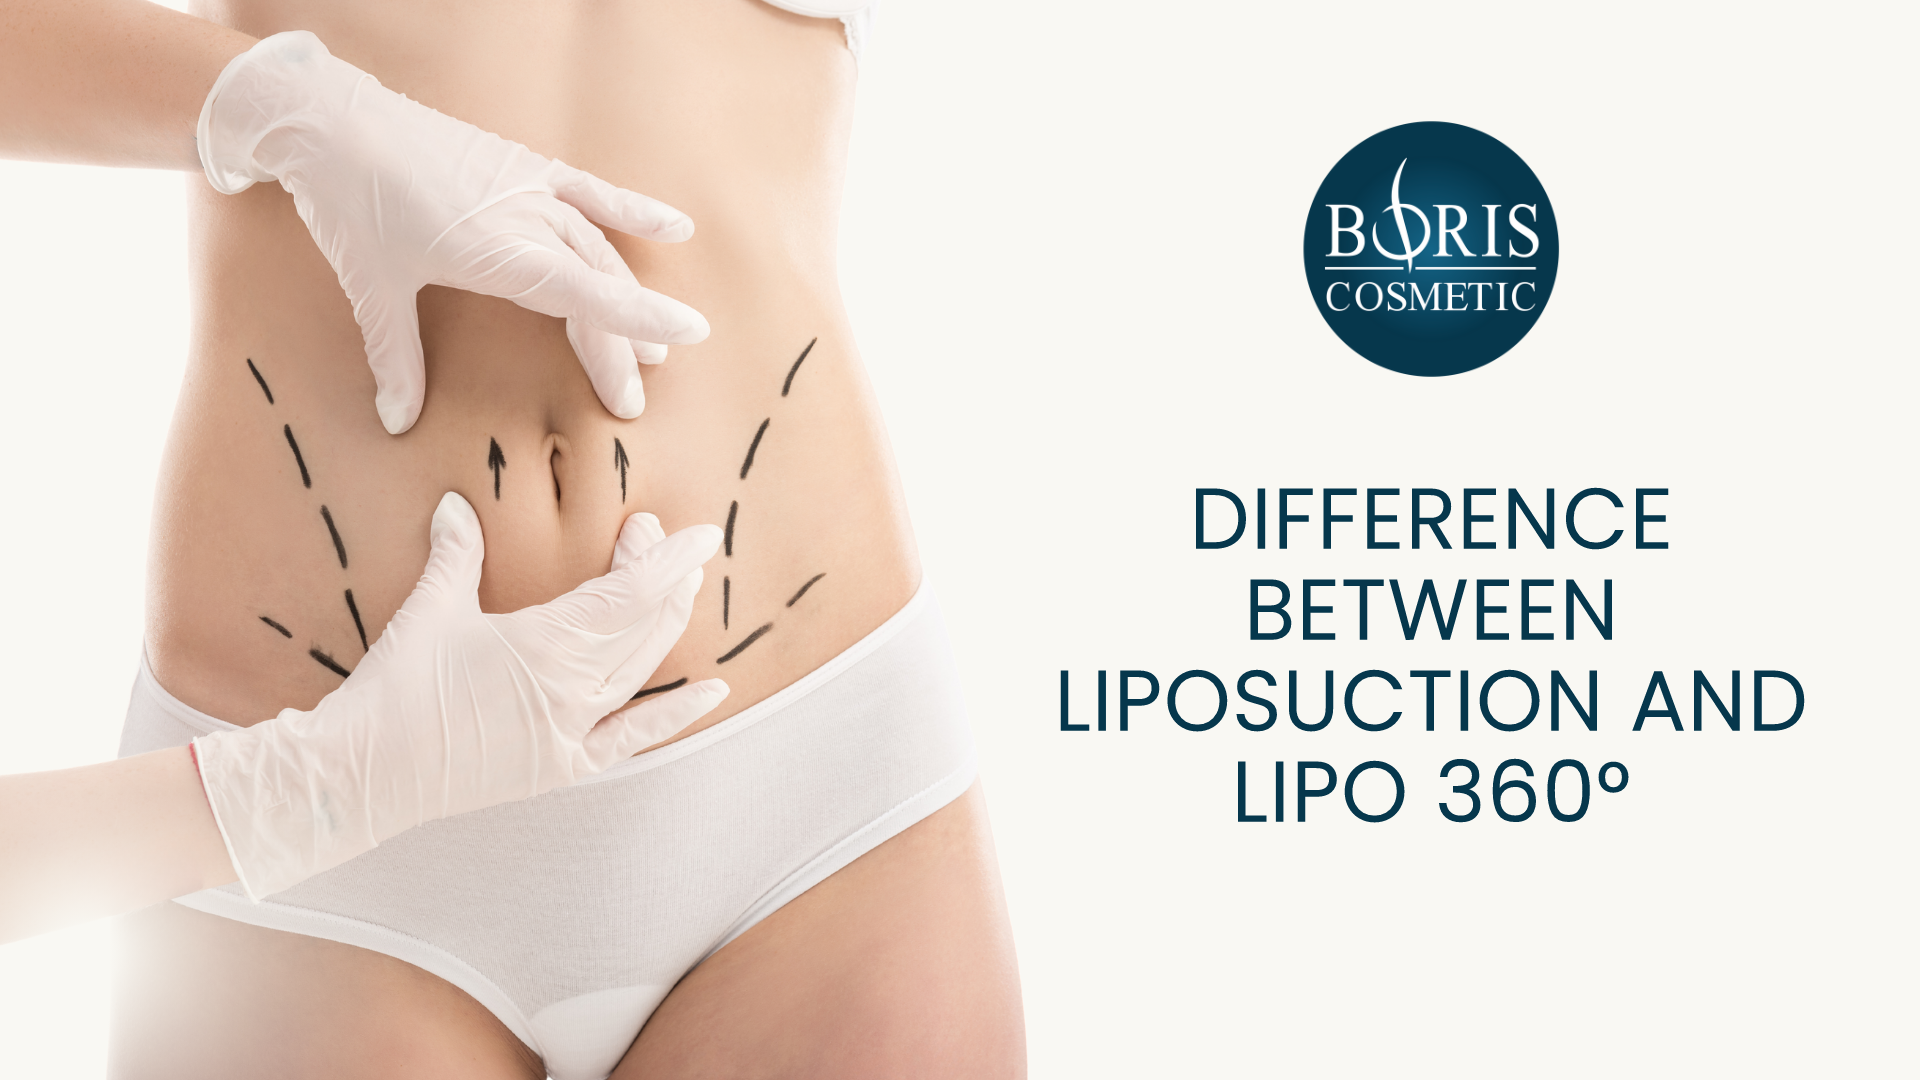 What is lipo 360? It is looking at the body in multiple dimensions